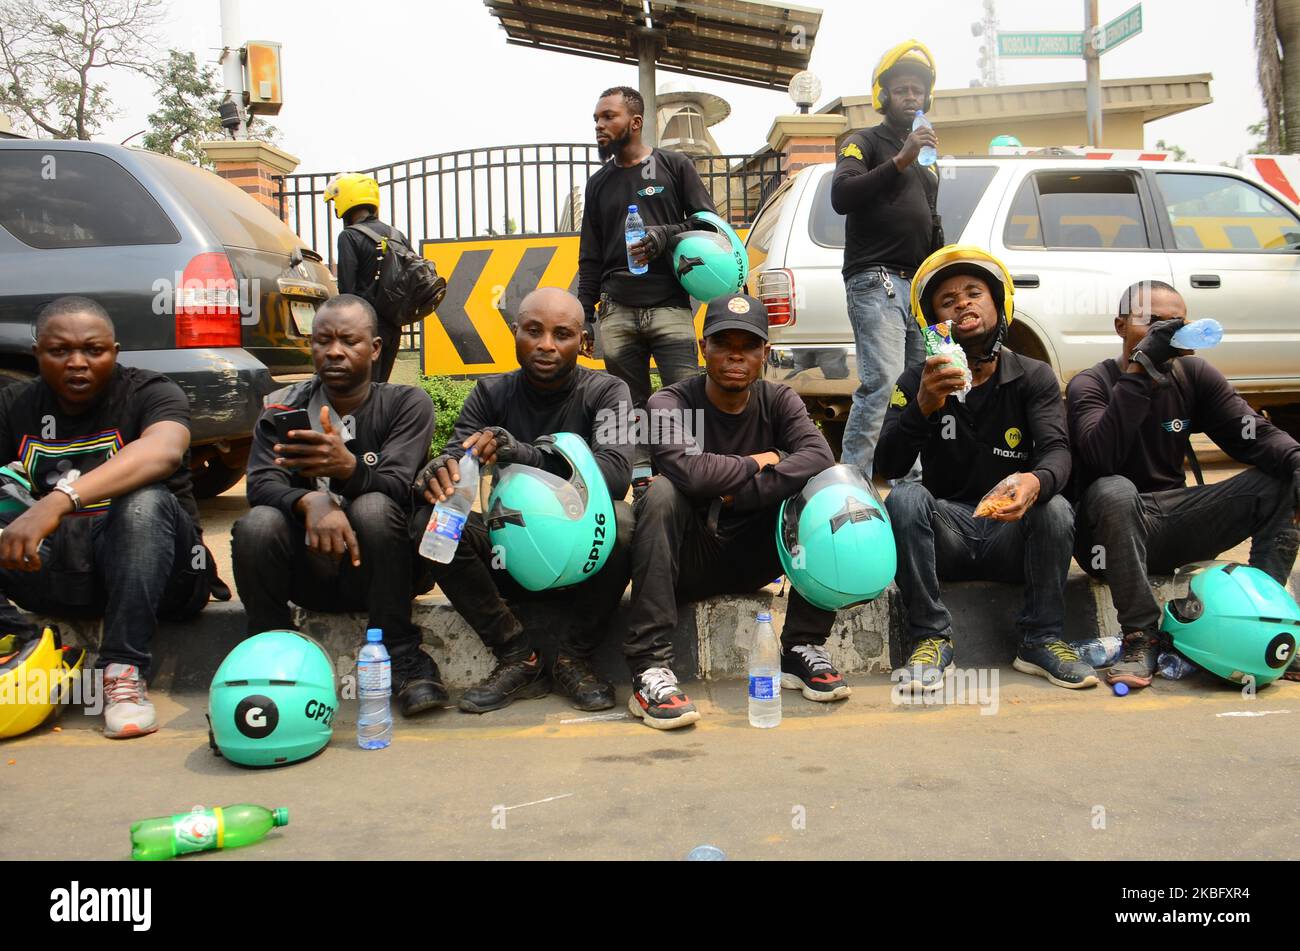 Some of the riders seat to rest during their protest at the Lagos State House of Assembly as Riders on the platform of Opay and Gokada hailing services staged a peaceful protest on Friday, to protest the ban announced by the Lagos State Government on motorcycle and tricycle taking effect from February 1st, on January 31, 2020. (Photo by Olukayode Jaiyeola/NurPhoto) Stock Photo